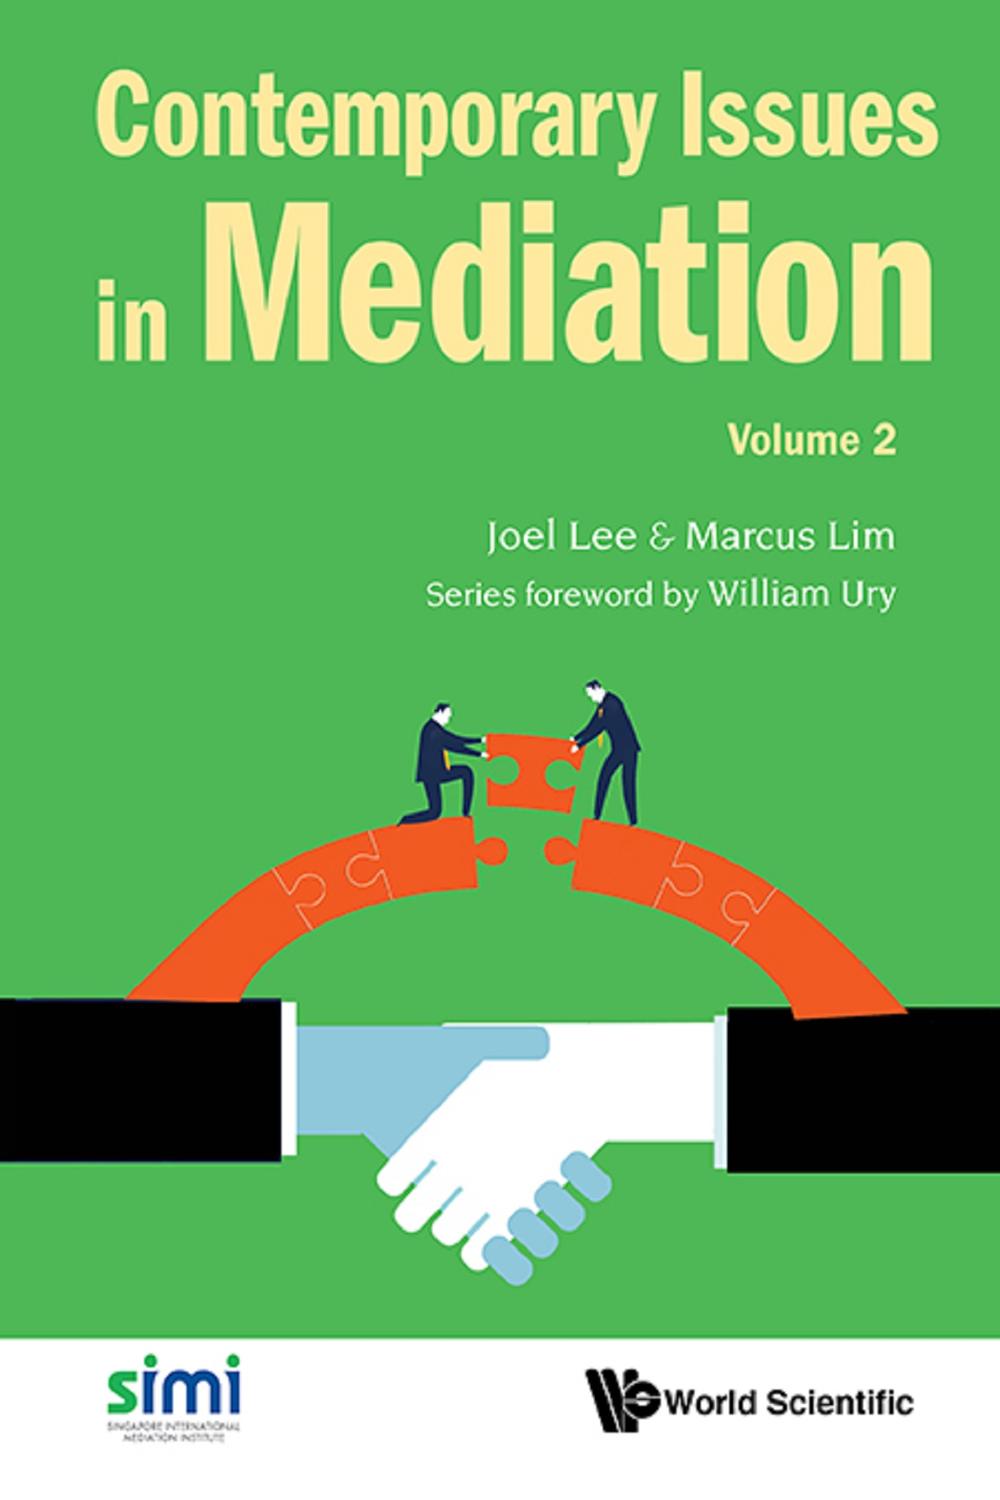 Contemporary Issues In Mediation - Volume 2 - Joel Lee, Marcus Lim